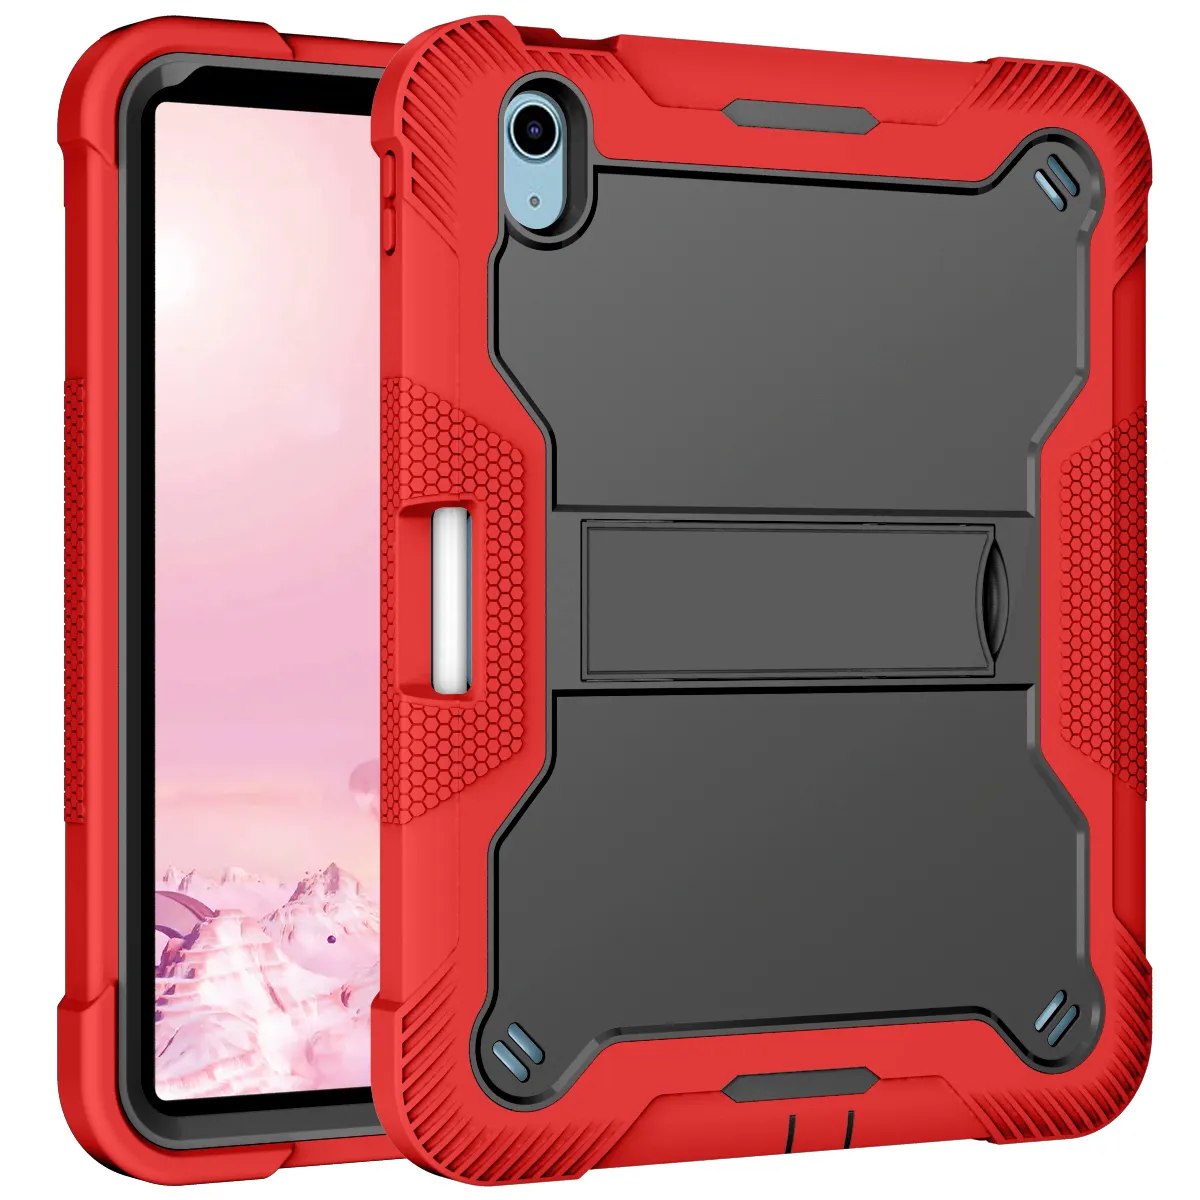 Kids Style Rugged Tablet Covers Cases For iPad 10.2 7/8/9th Generation Built In Kickstand Shockproof Protective Case